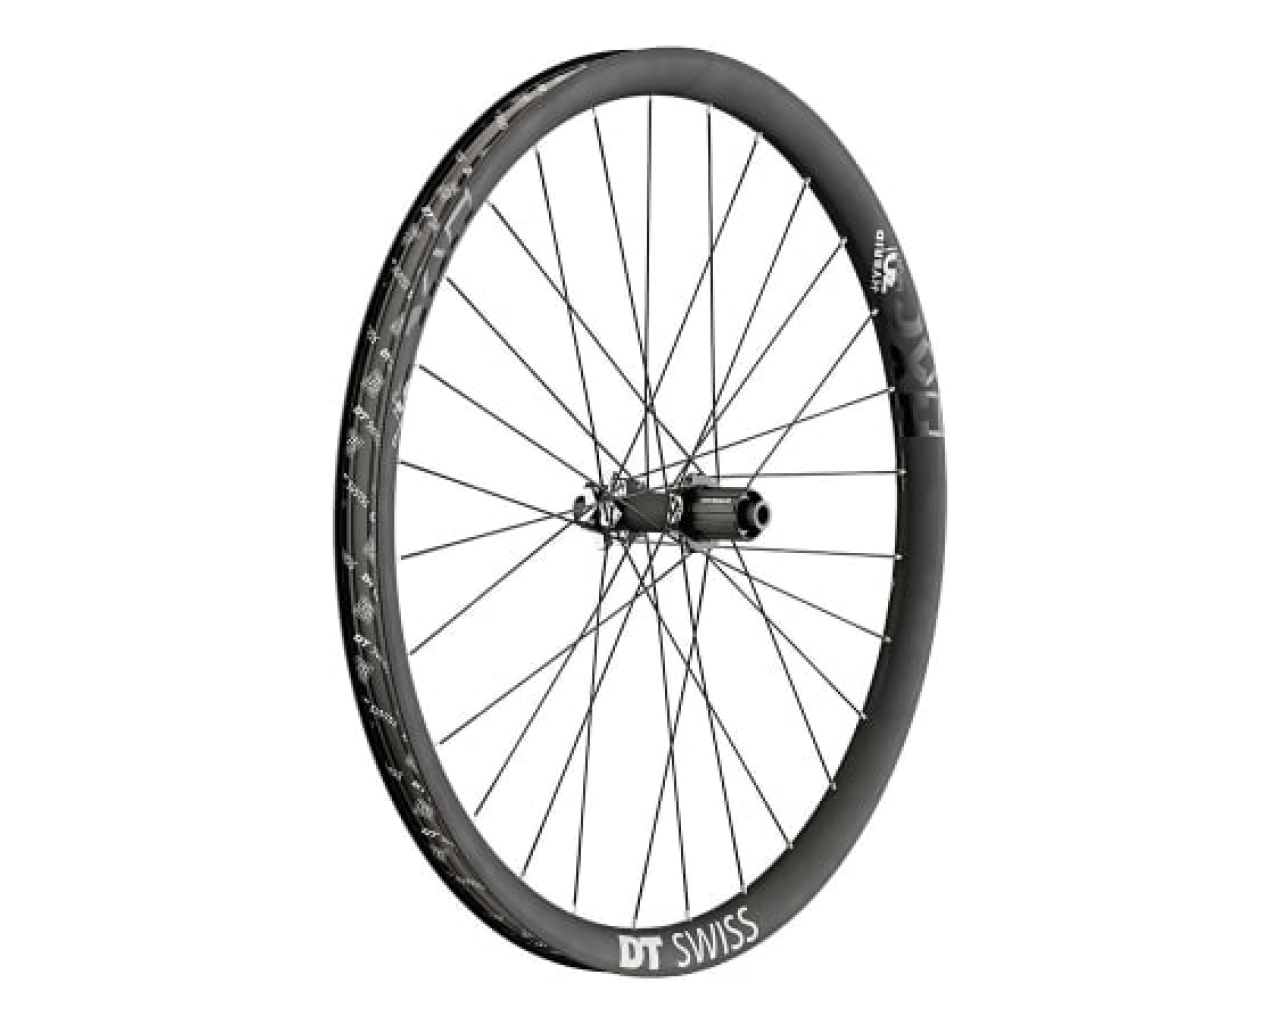 Rueda Trasera Dt Swiss Hybrid 1700 Sp 27.5" IS35 Boost - Riders Boutique Barcelona